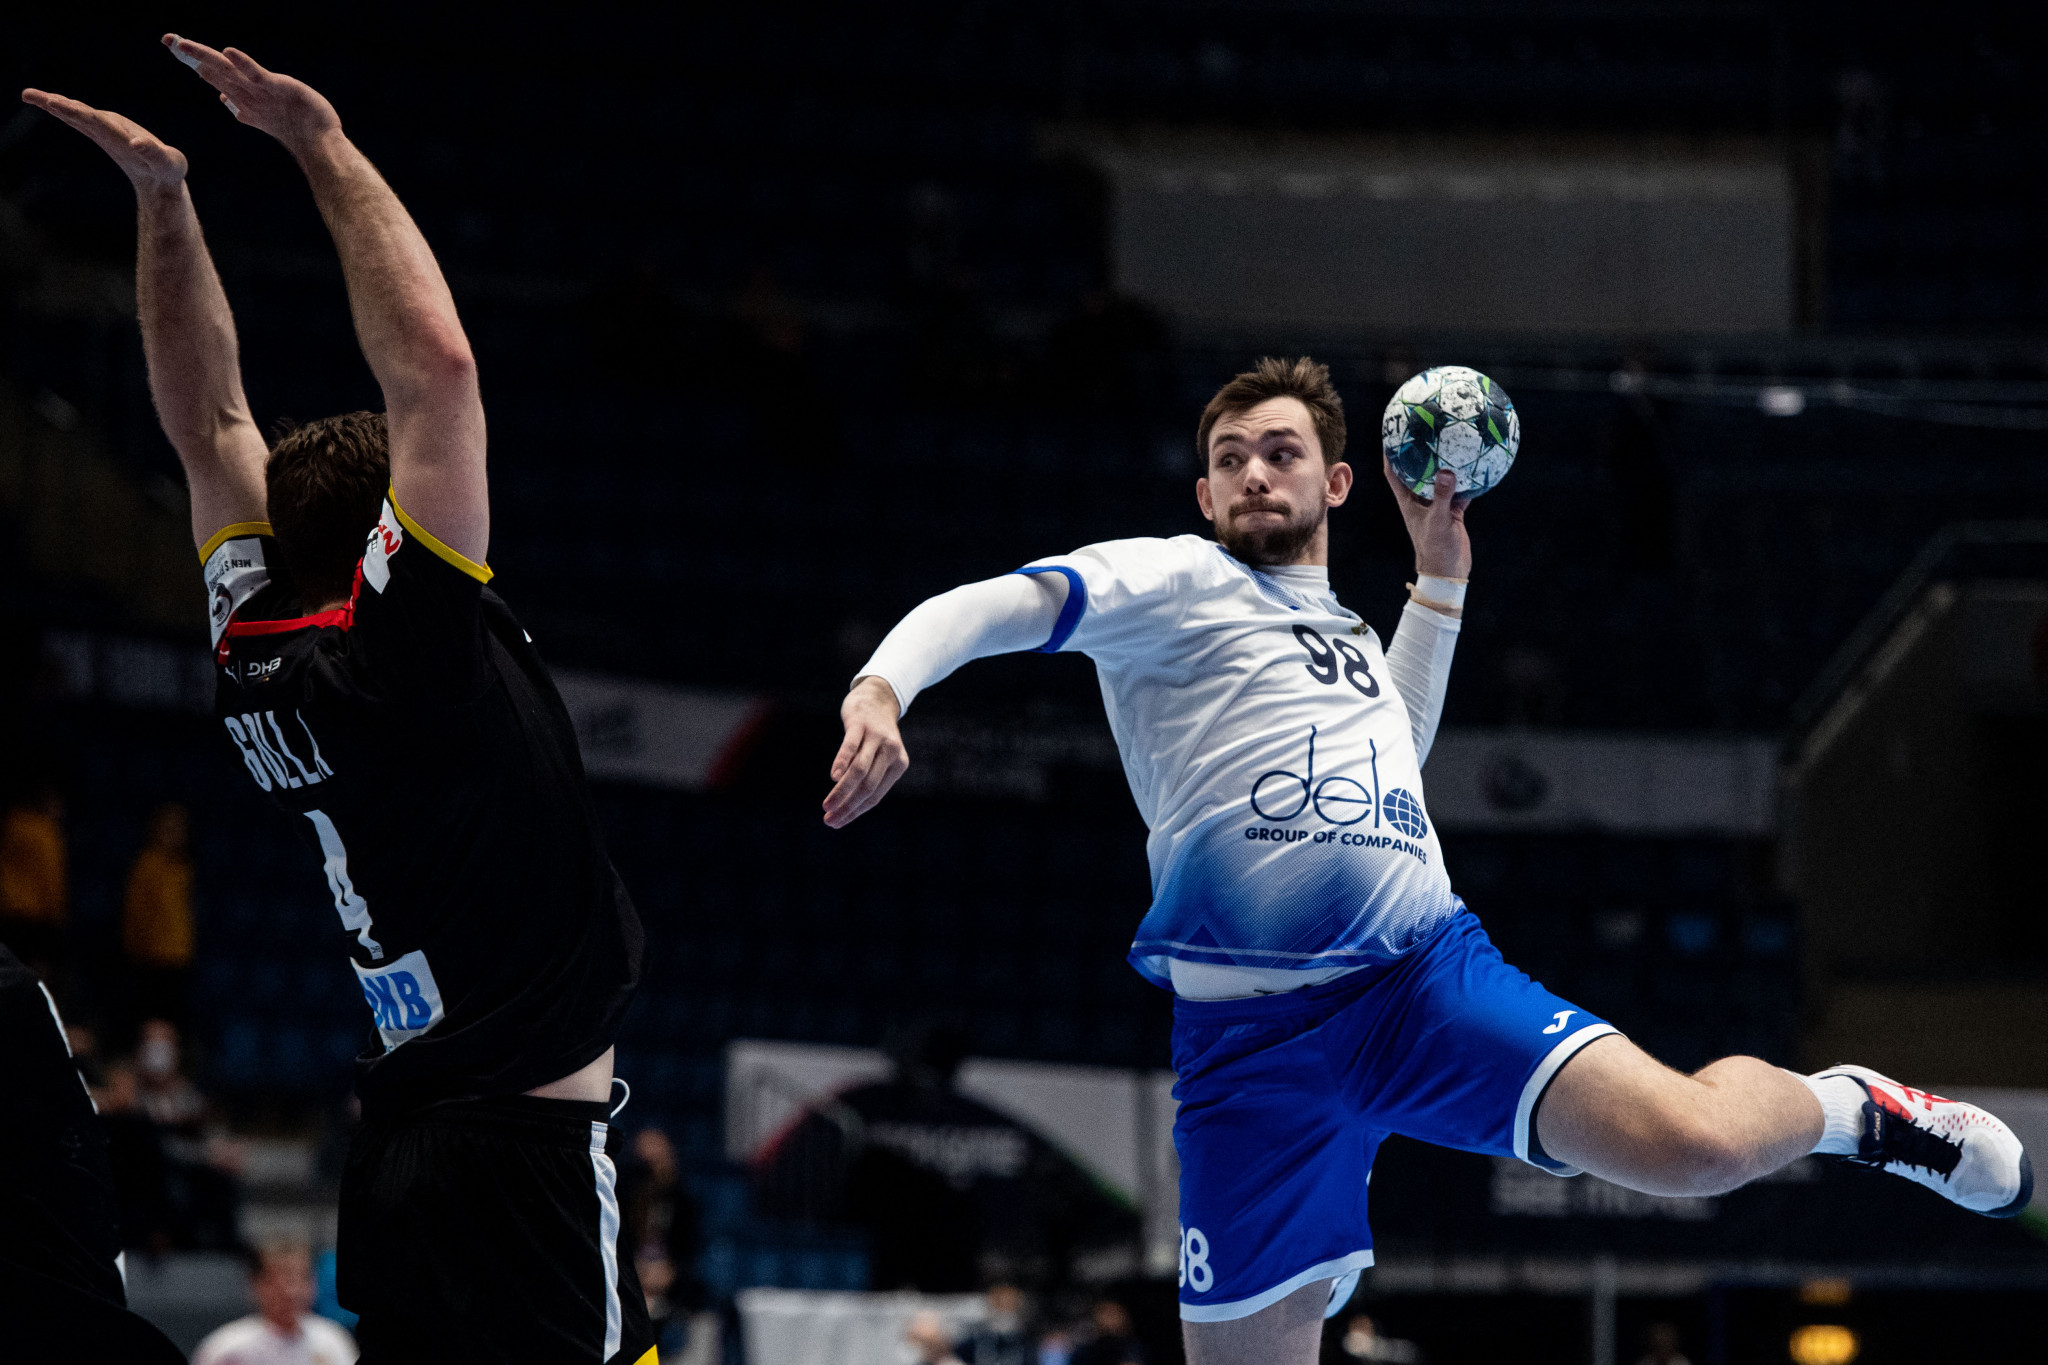 Russian Handball Federation invited to EHF and IHF events, but not to compete